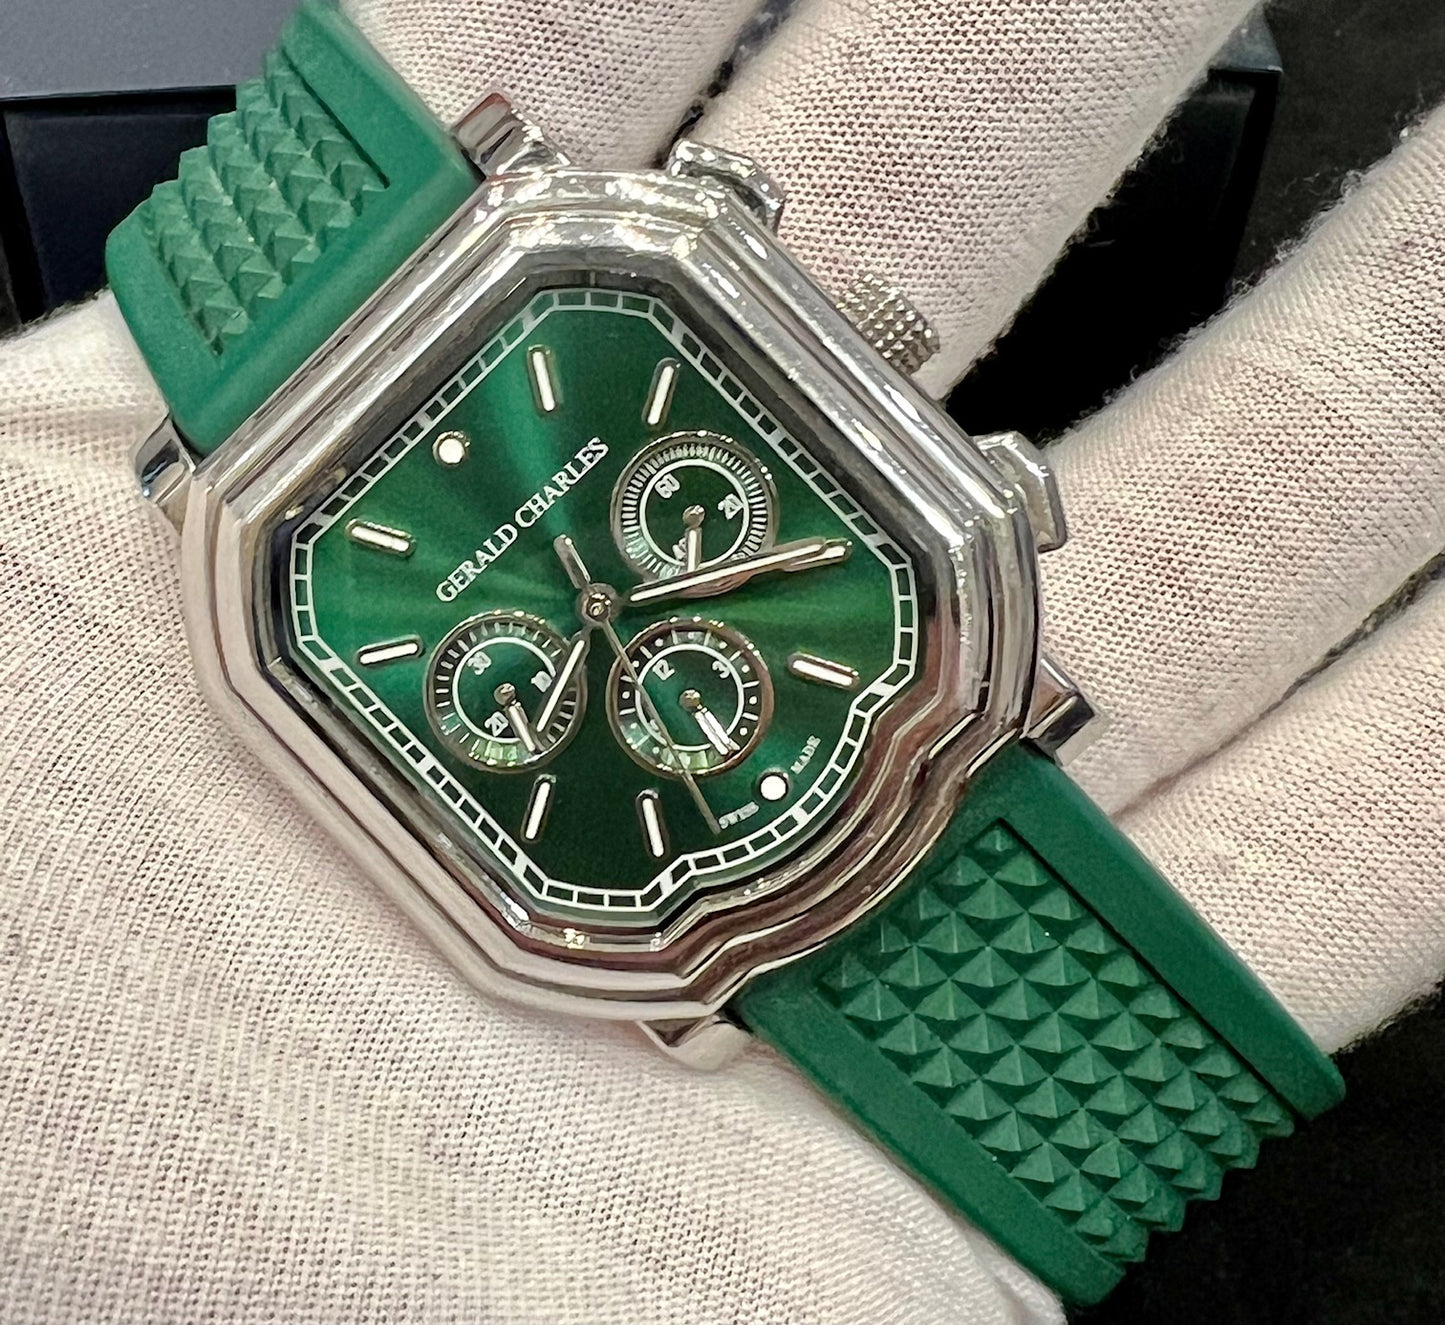 Gerald Charles Maestro 3.0 Chronograph Green Only Watch